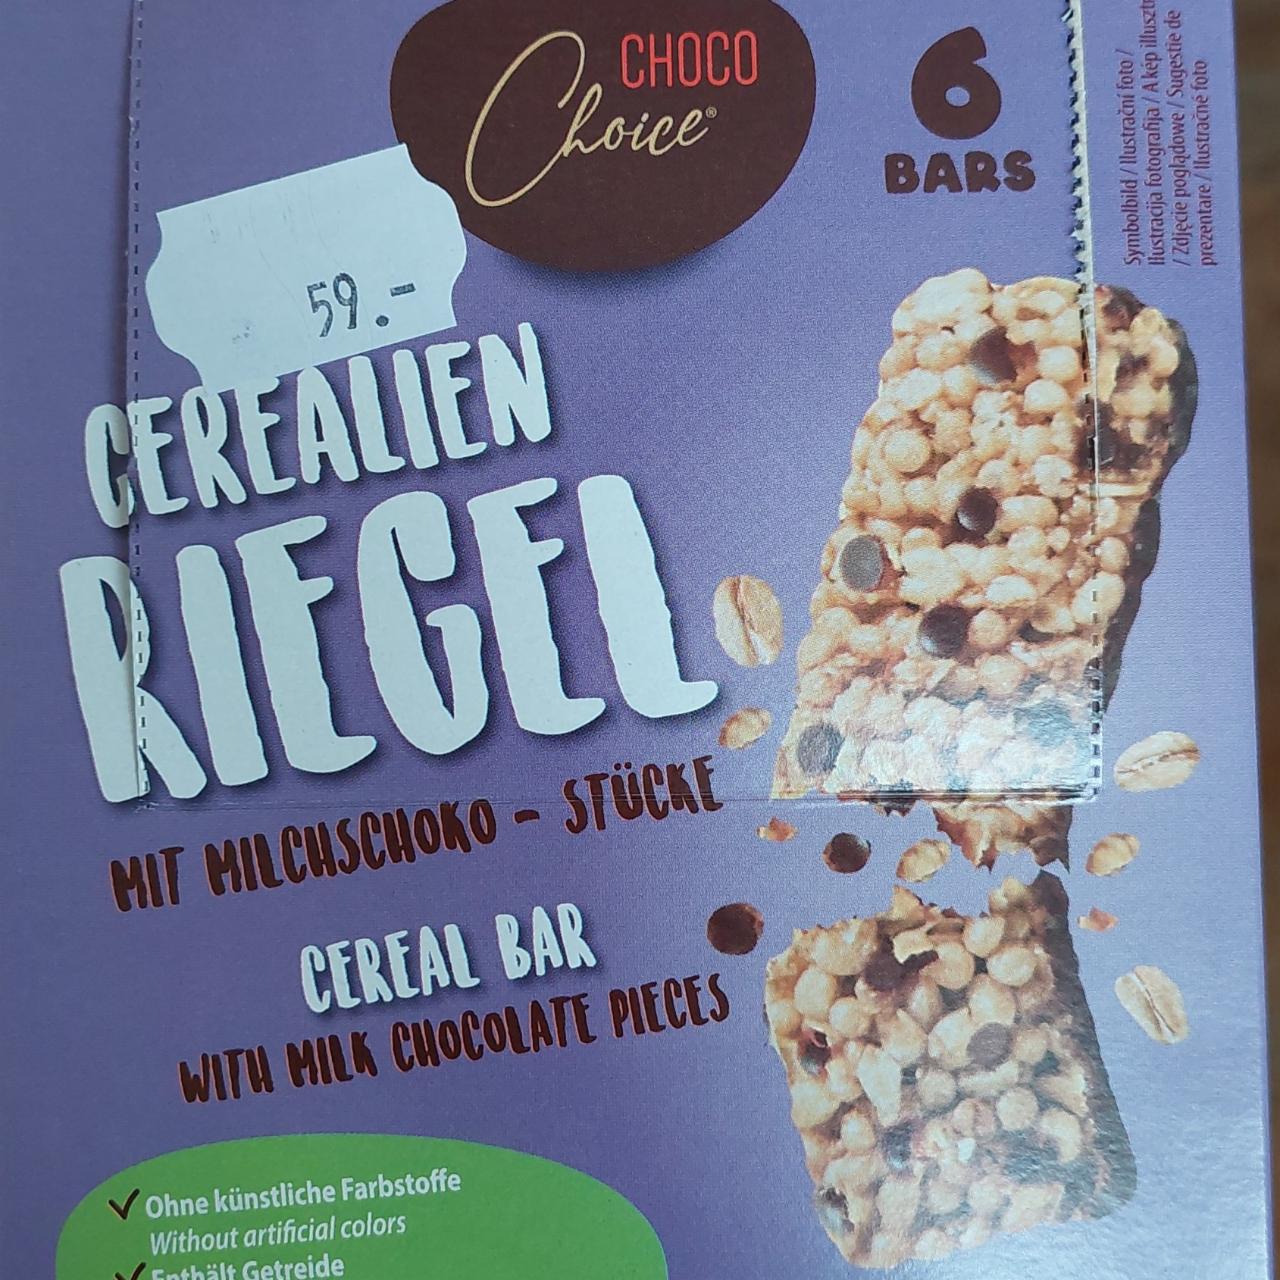 Fotografie - Cereal bar with milk chocolate pieces Choco choice